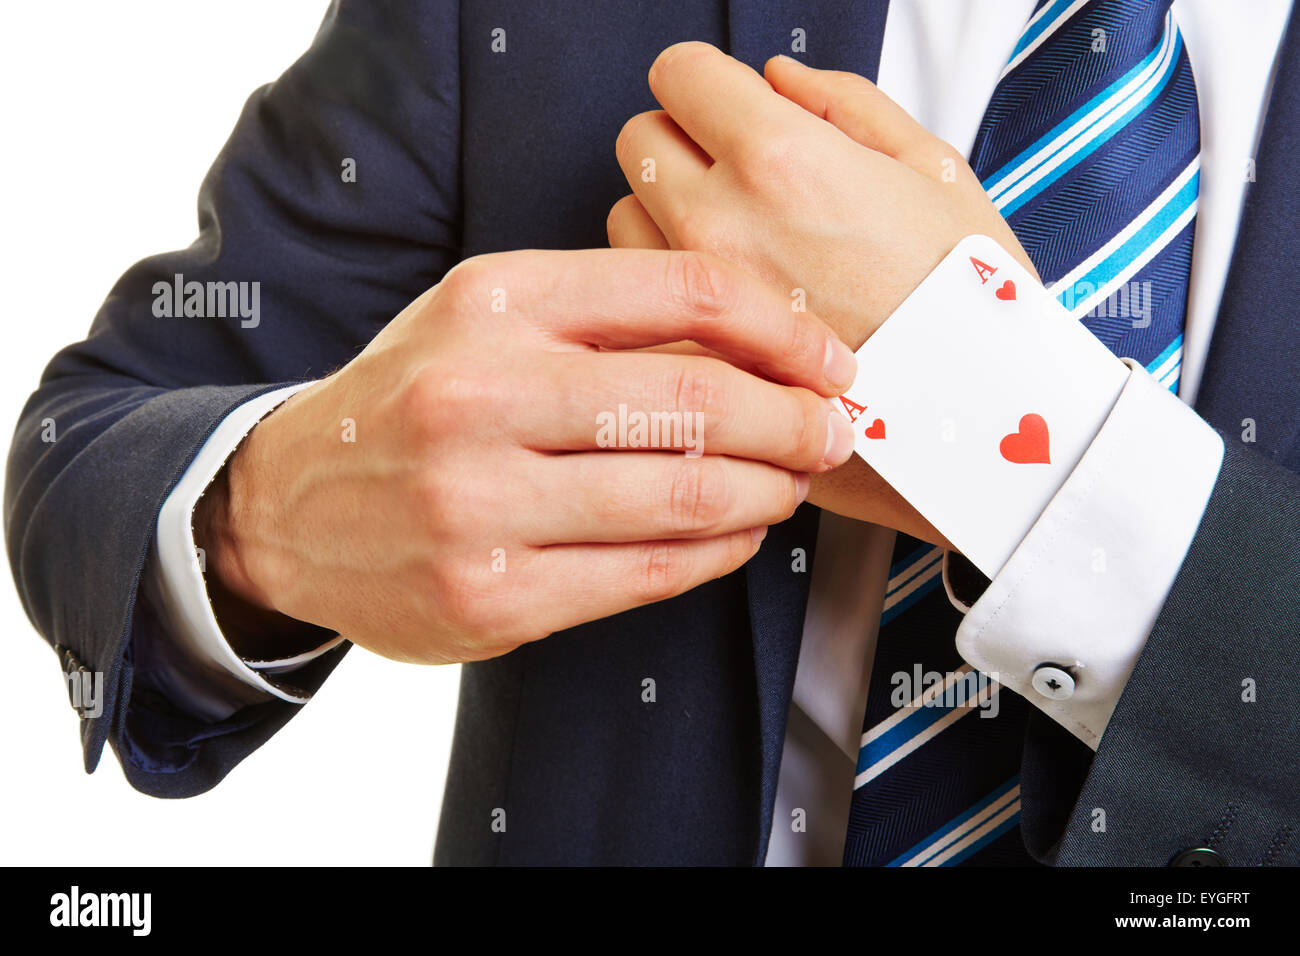 Successful business man with an ace up his sleeve Stock Photo